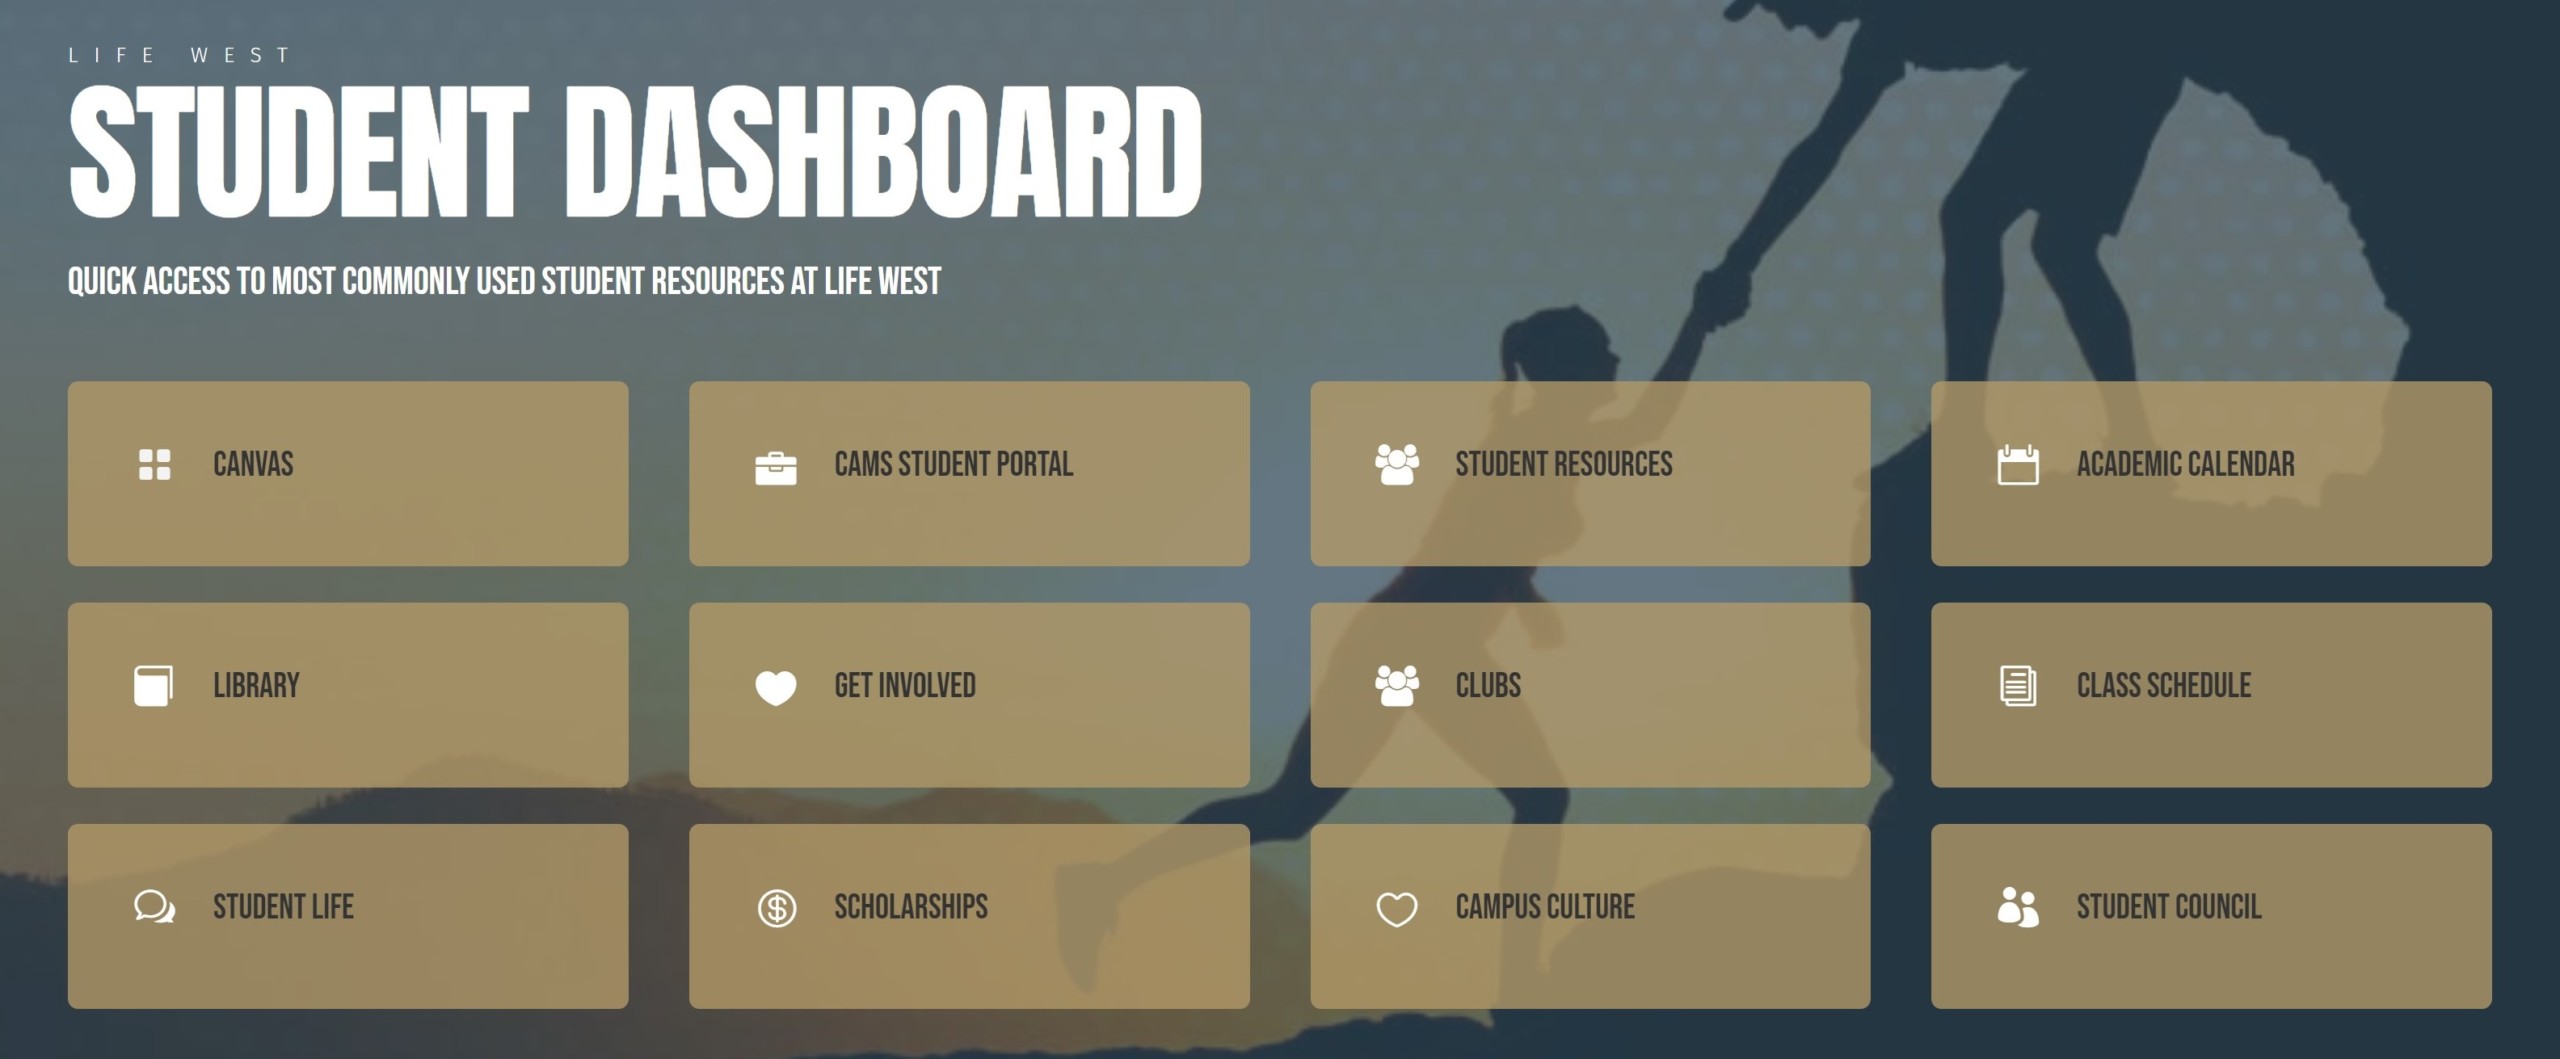 Life West Student Dashboard